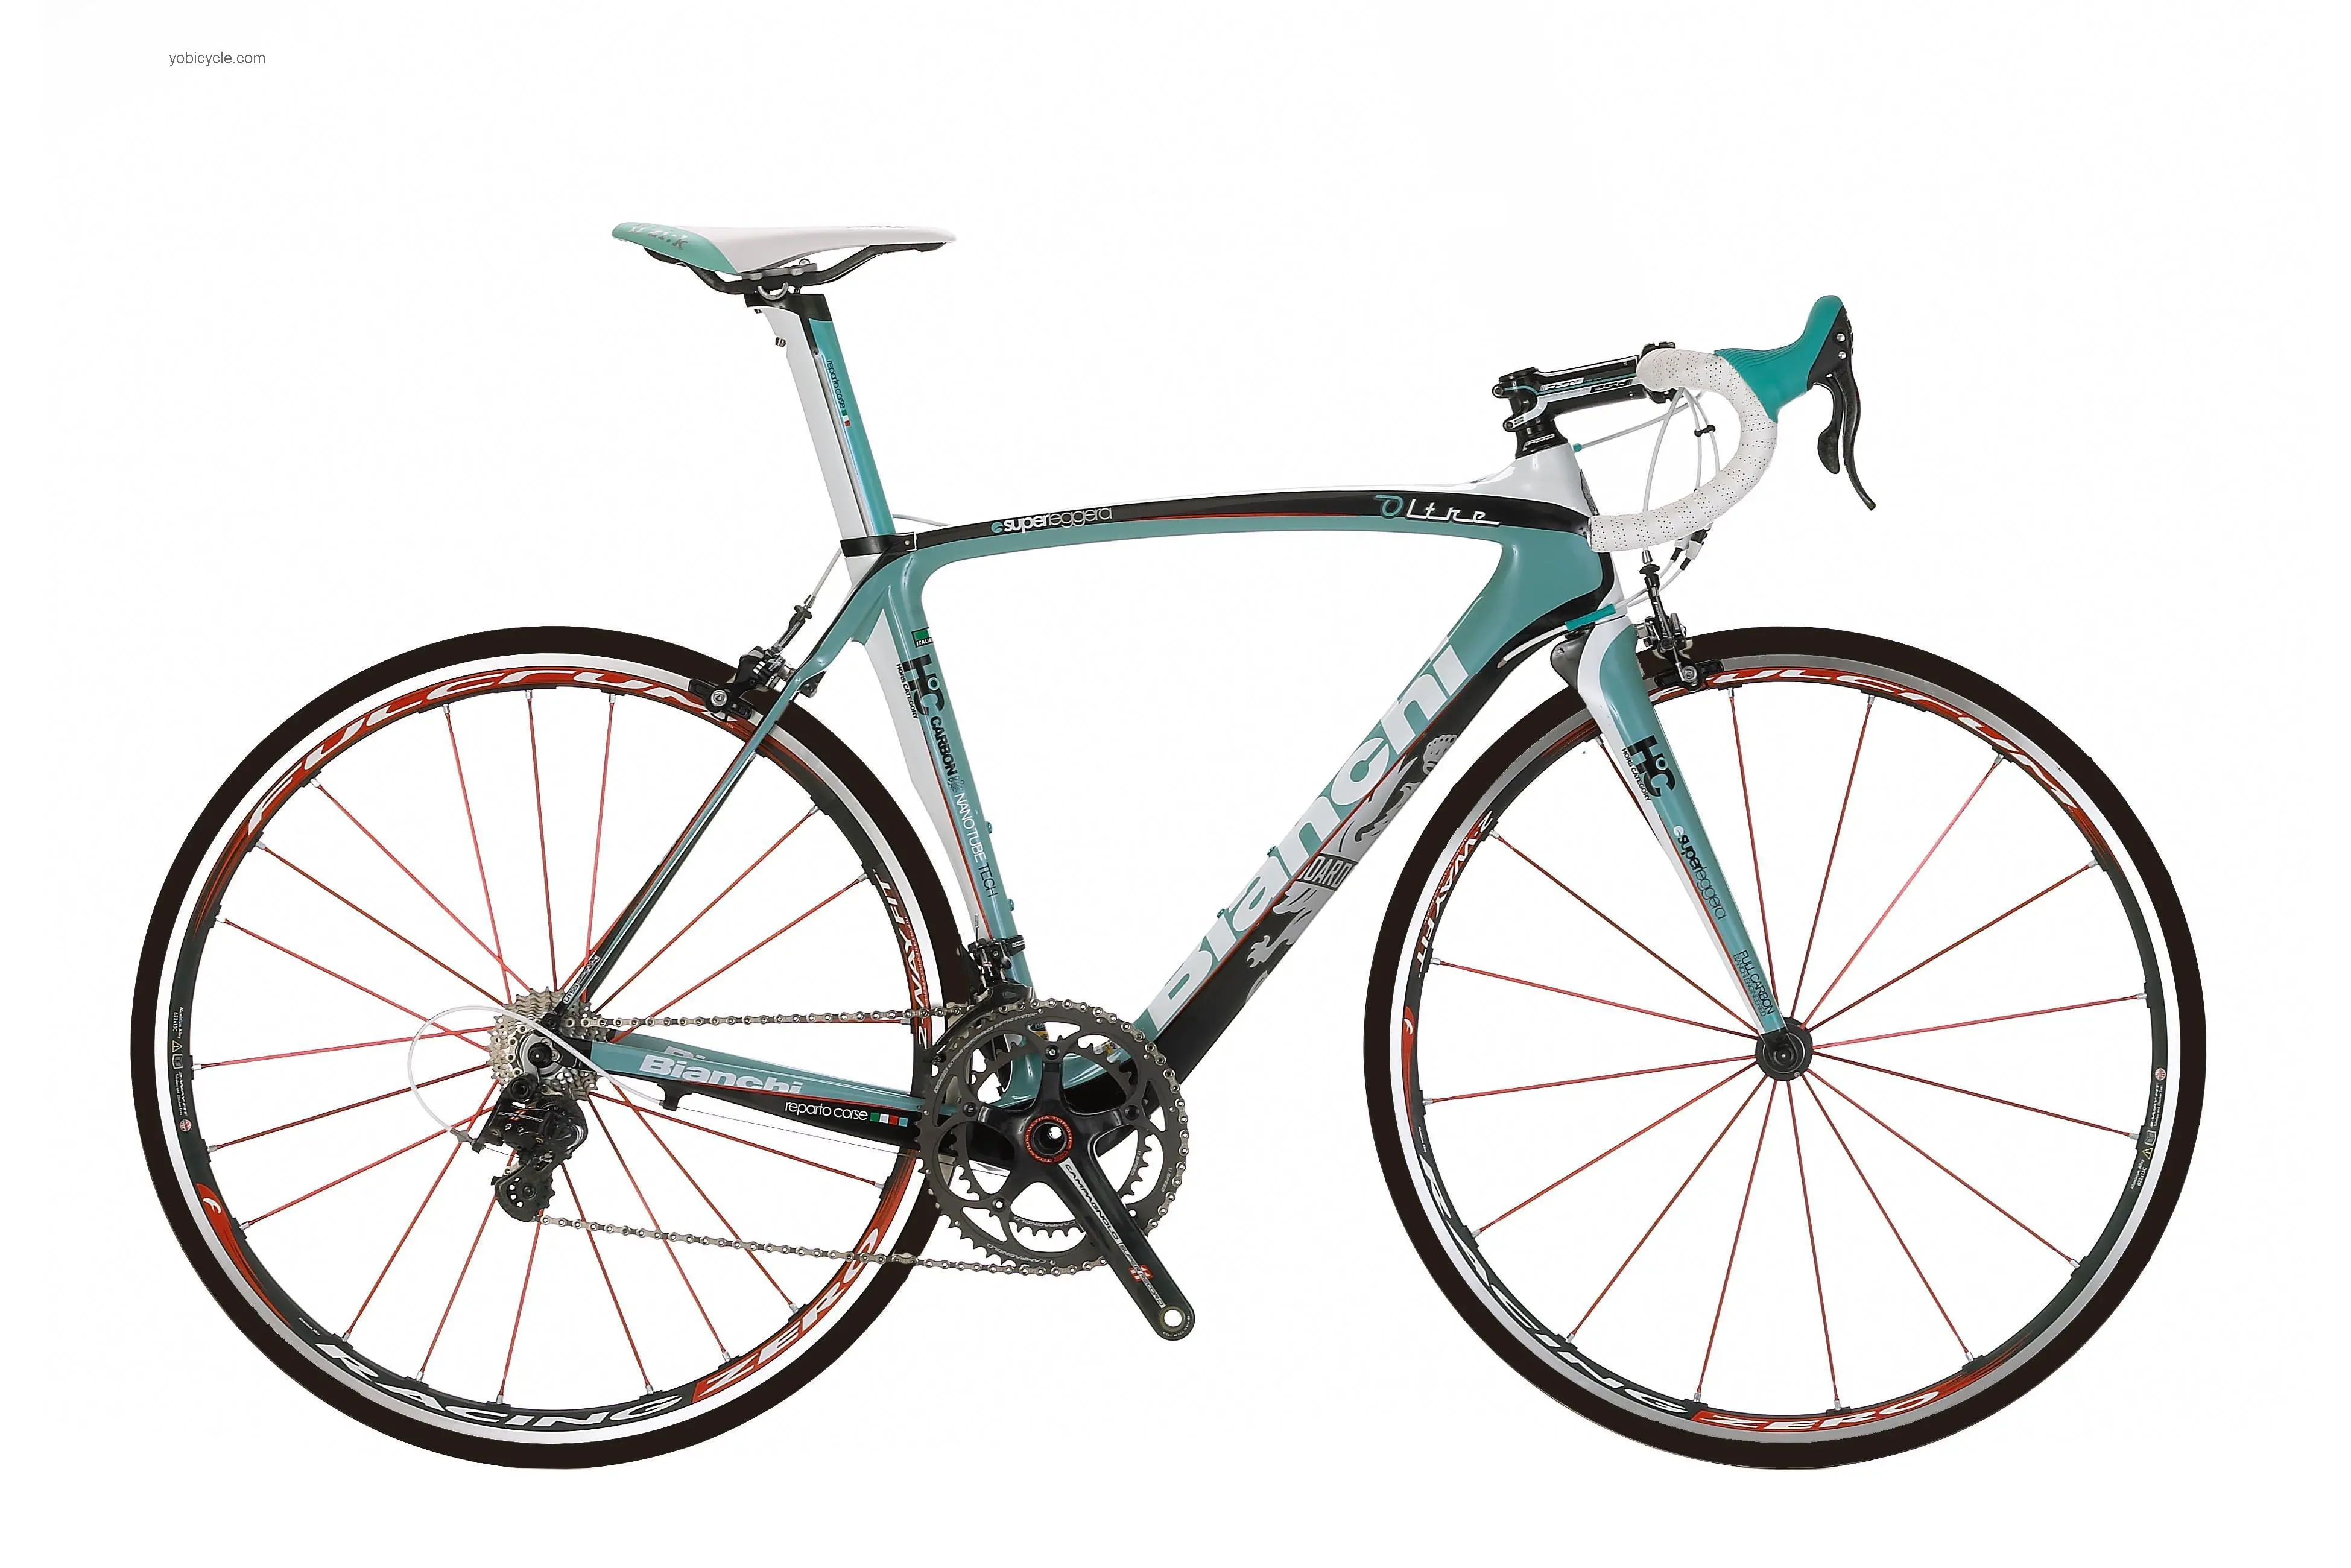 Bianchi Oltre Super Record competitors and comparison tool online specs and performance